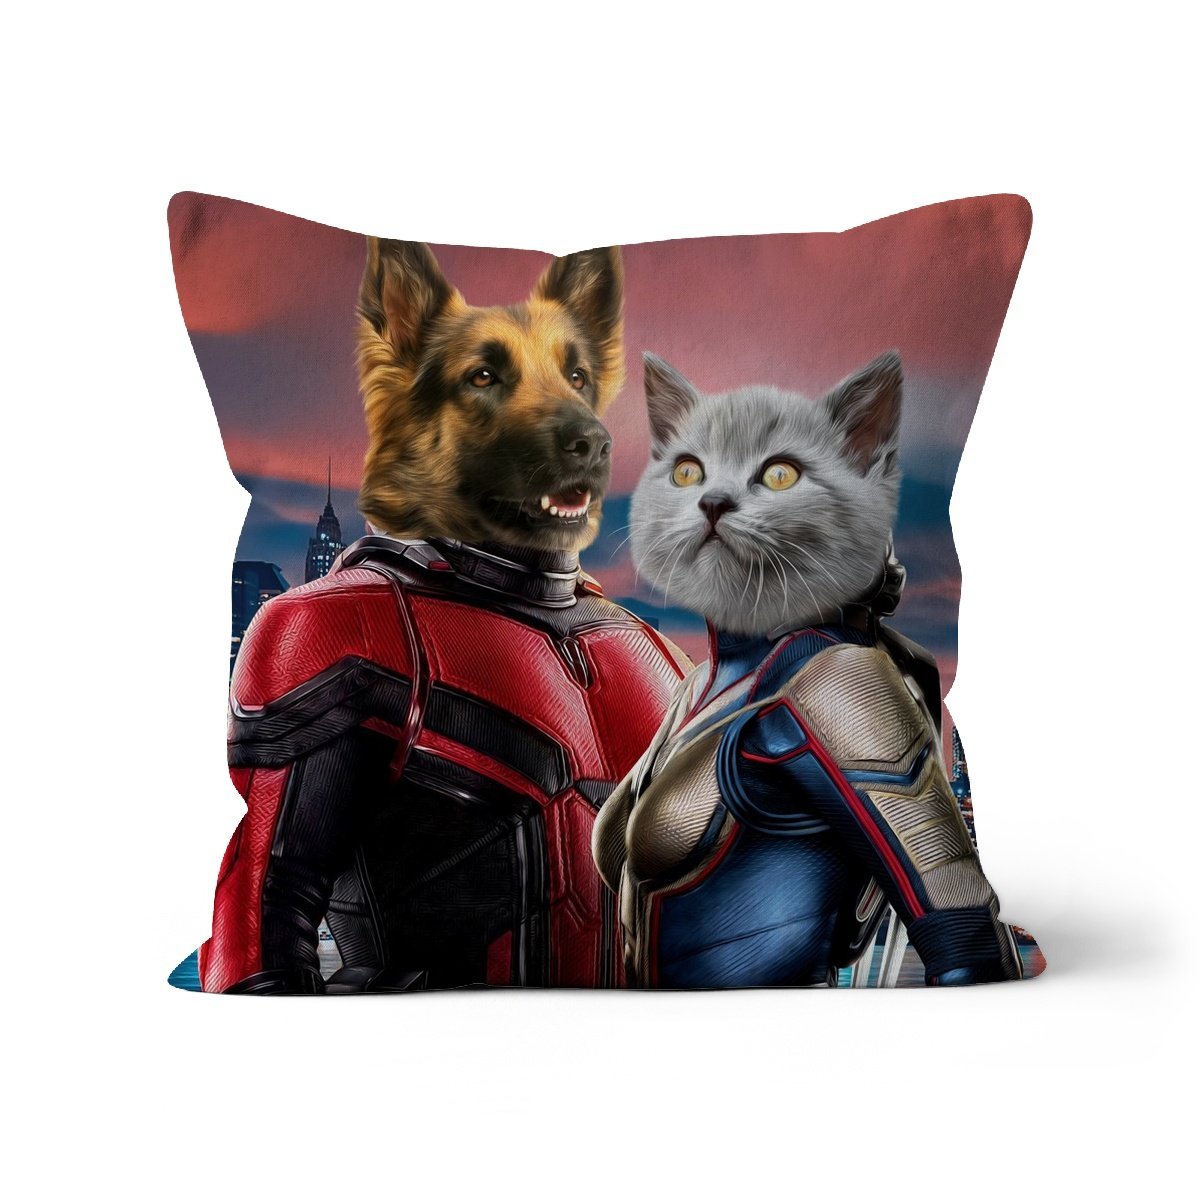 The Antan & The Wasp: Custom Pet Cushion - Paw & Glory - #pet portraits# - #dog portraits# - #pet portraits uk#pawandglory, pet art pillow,pillow personalized, pet face pillows, dog photo on pillow, pet custom pillow, pillows with dogs picture